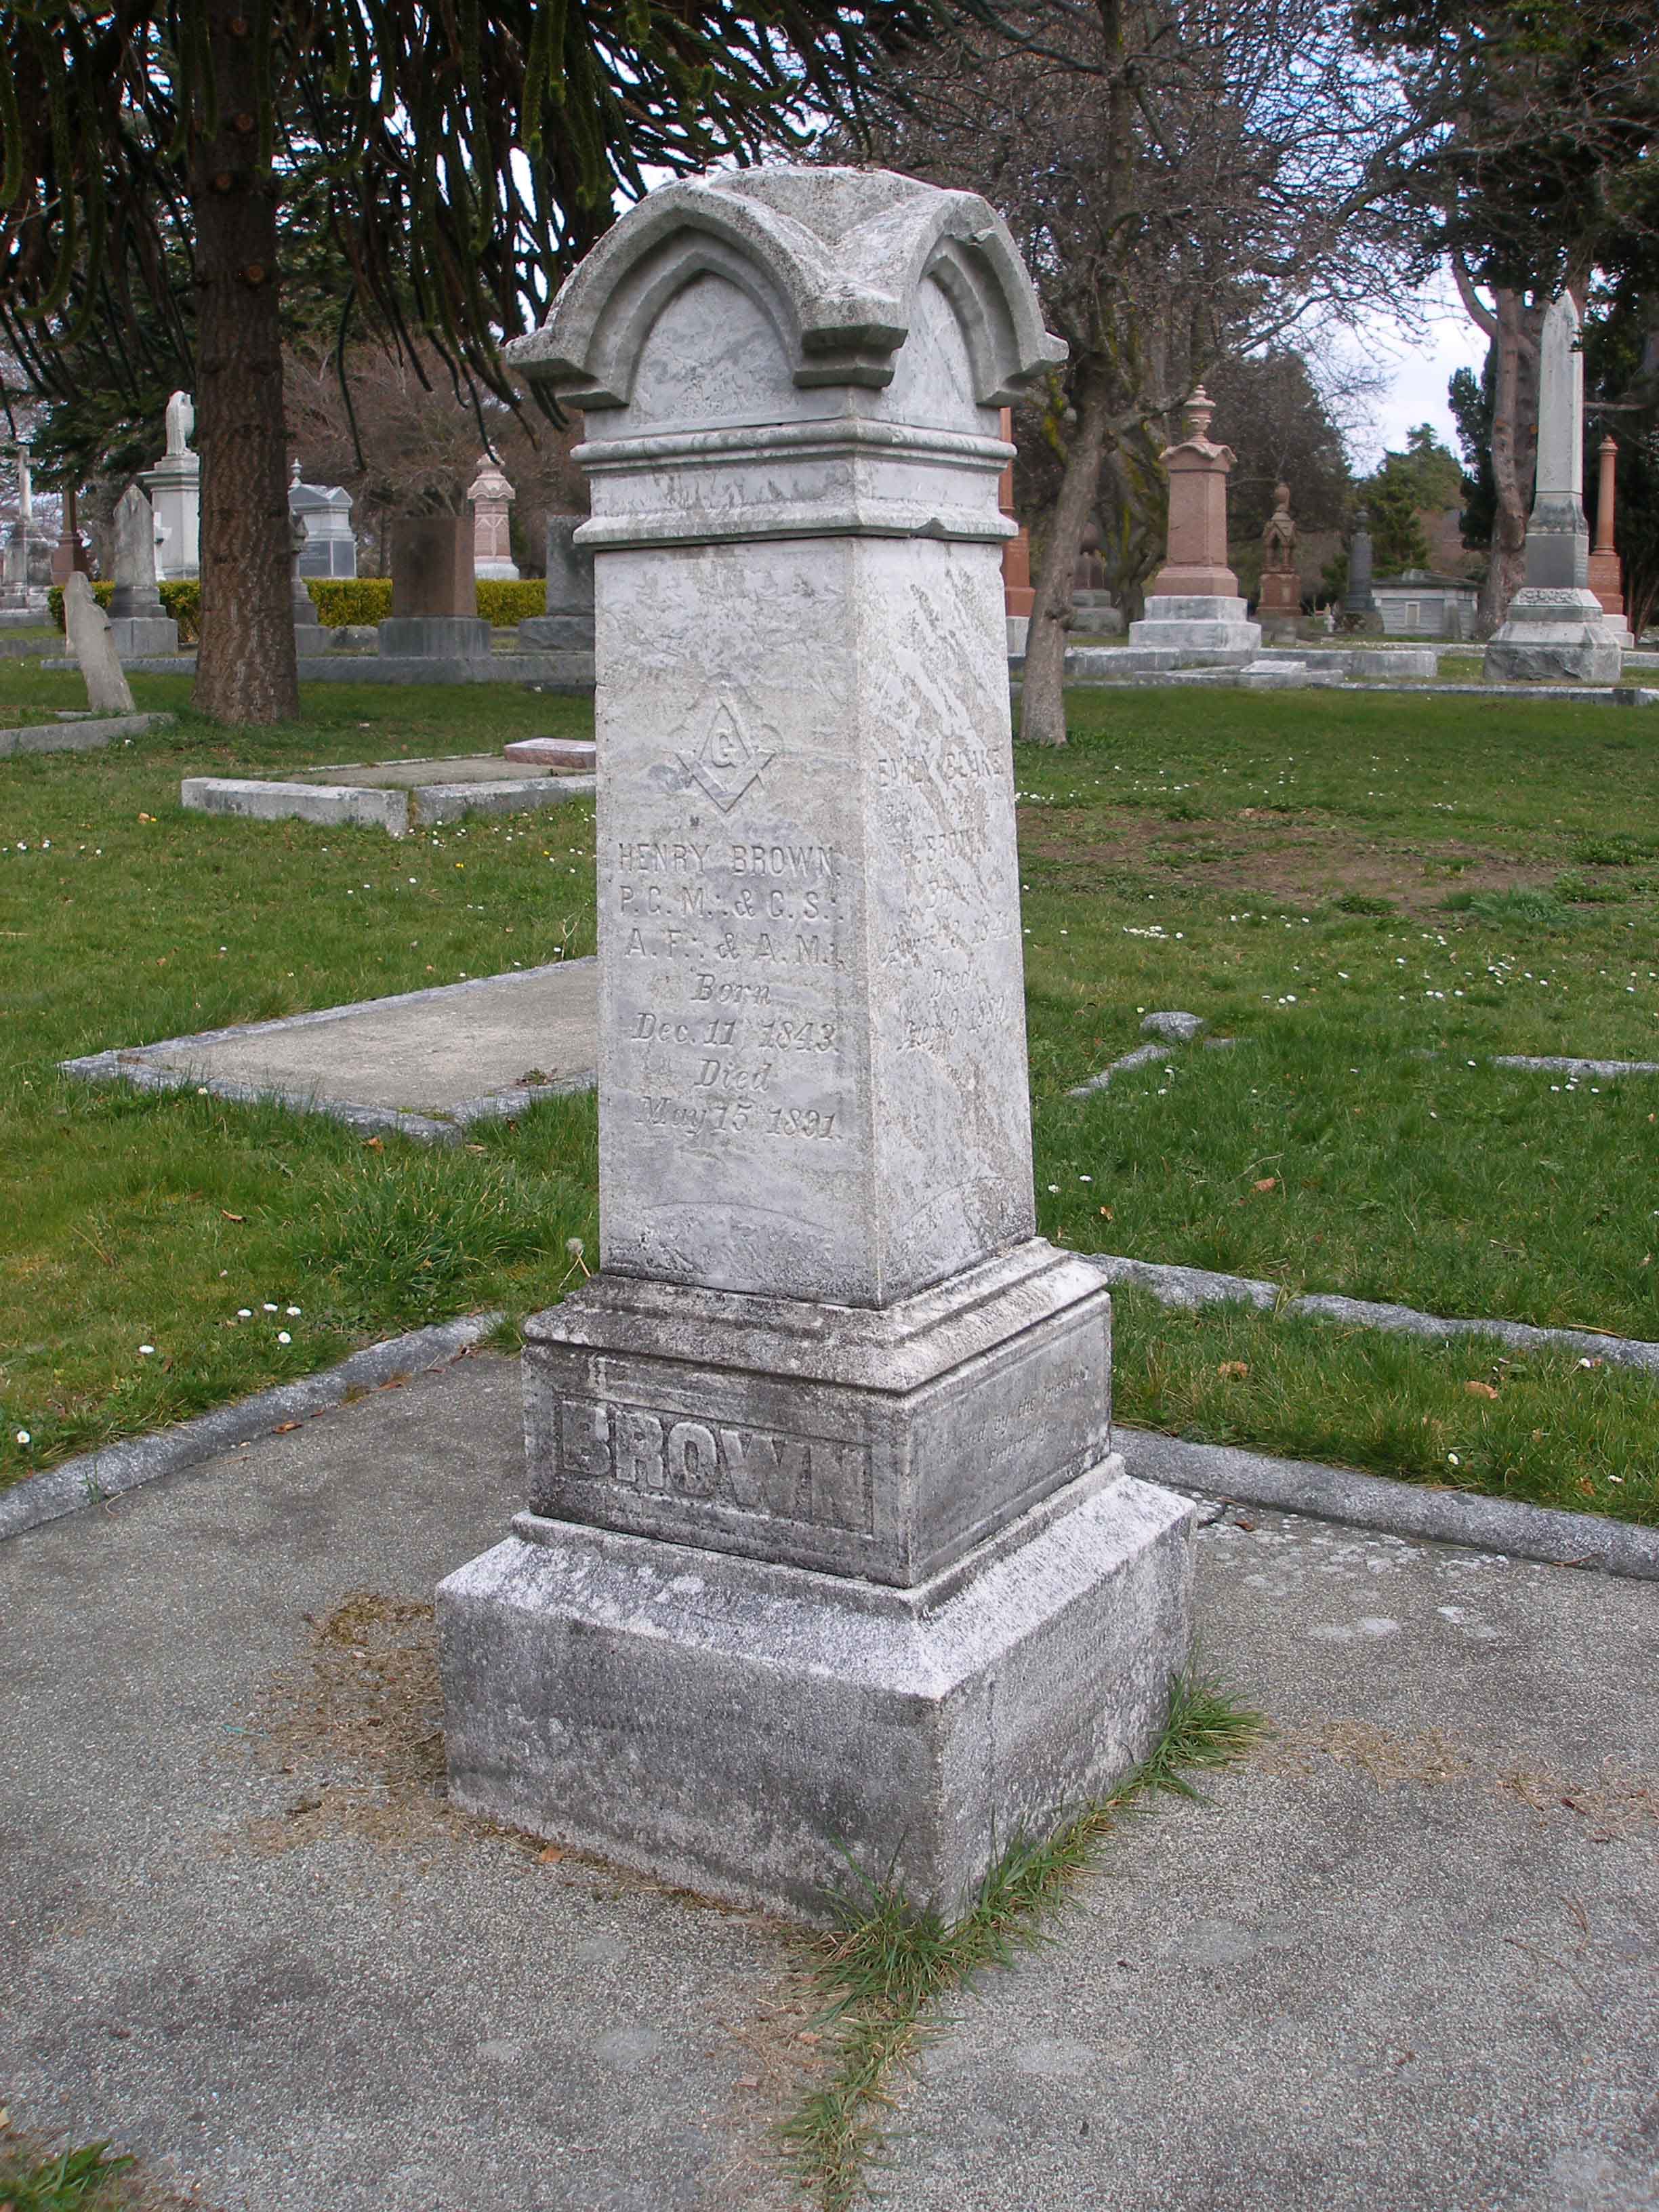 Henry Brown tomb, Ross Bay cemetery